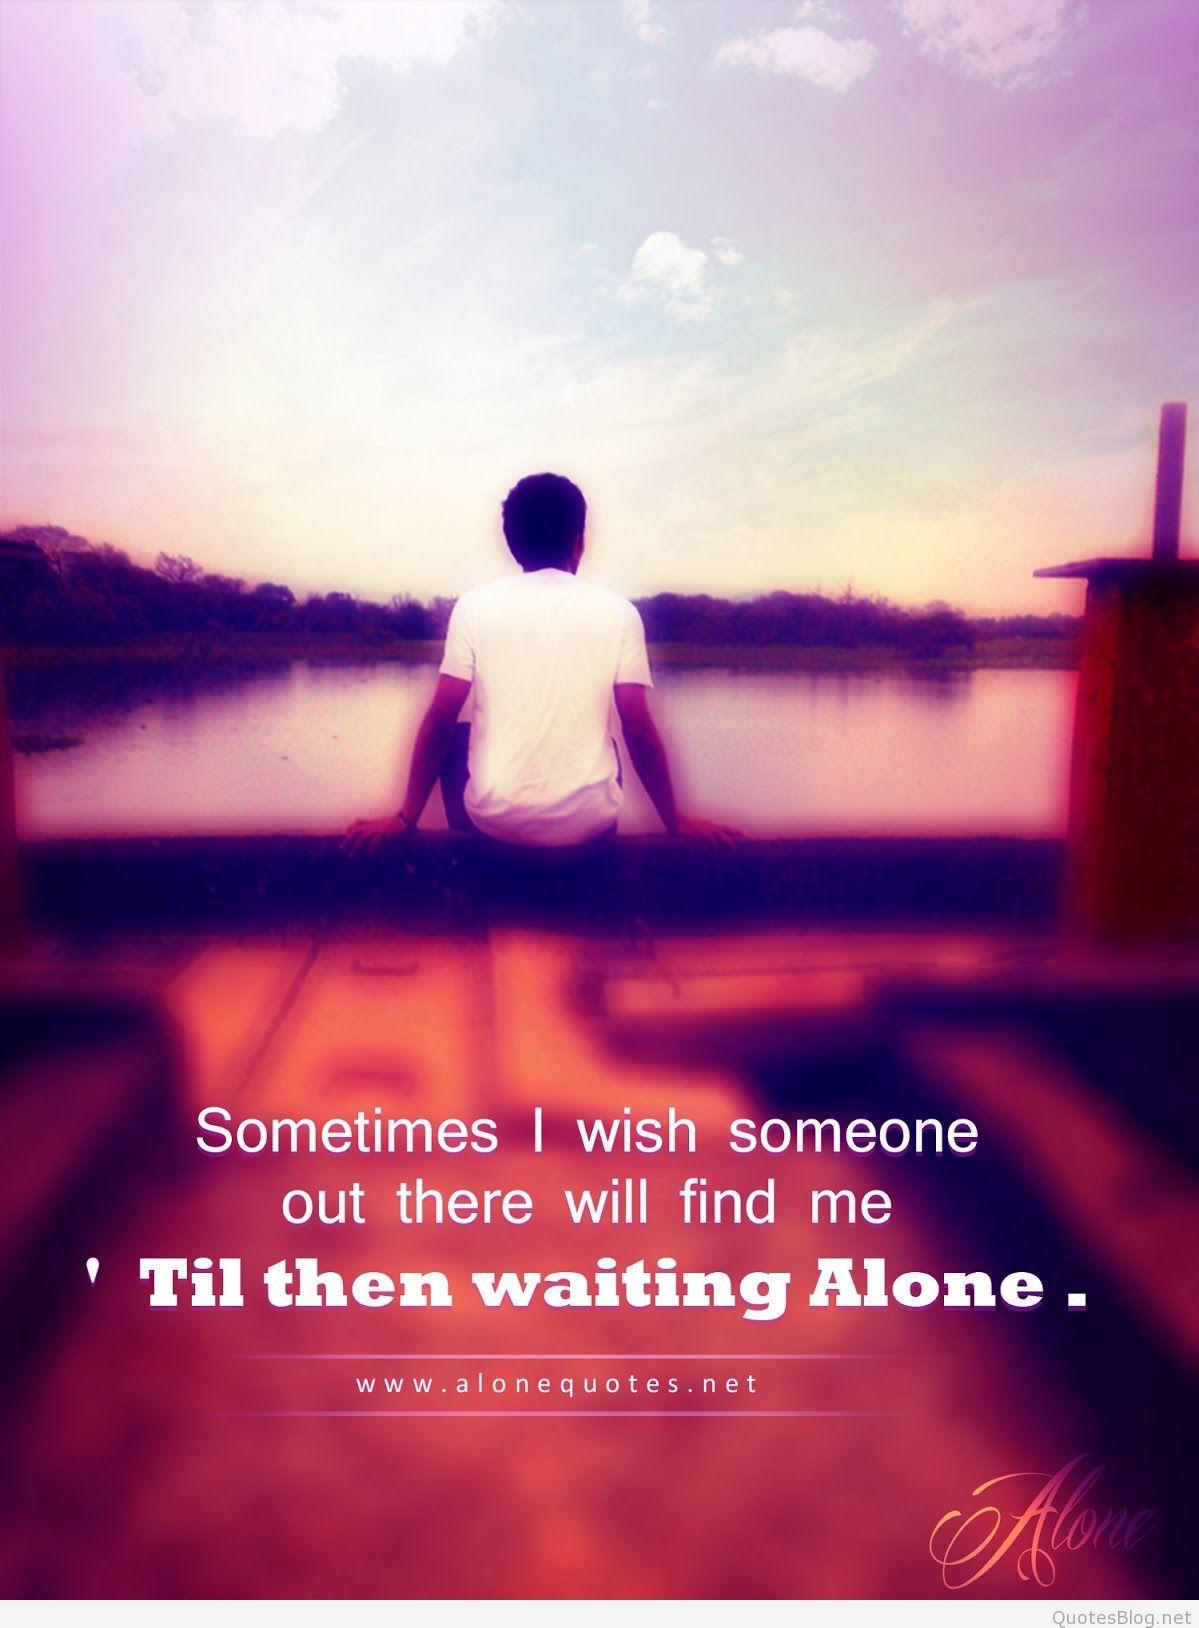 sad wallpapers of boys in love with quotes